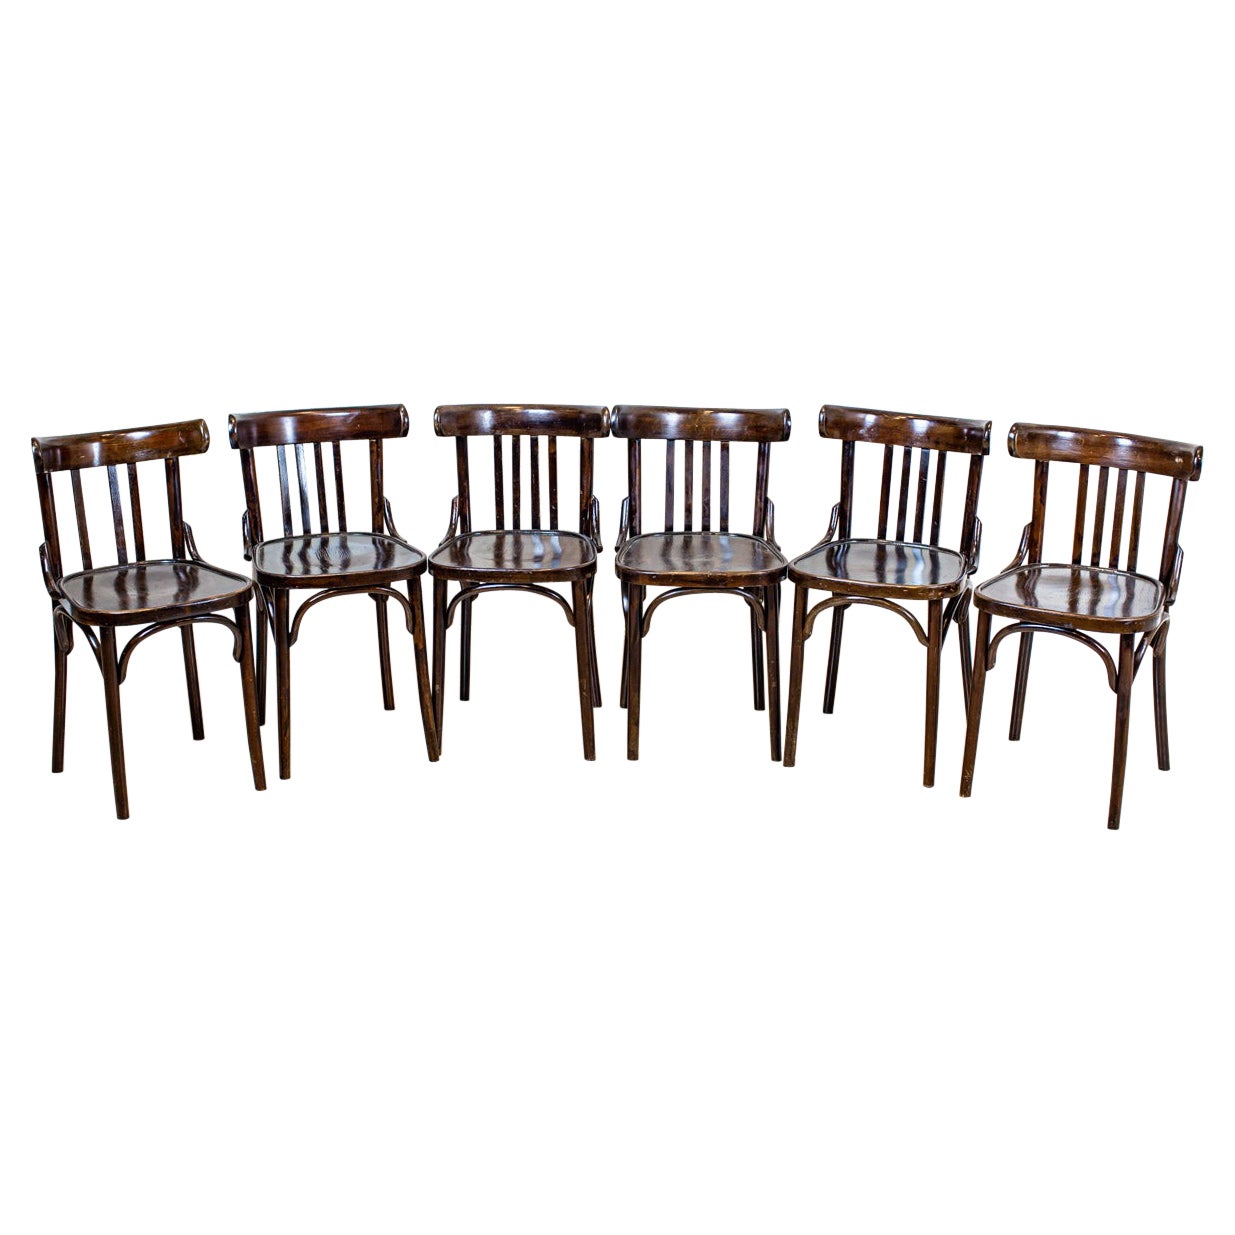 20th-Century Bentwood Beech Chairs in the Thonet Type in Dark Brown